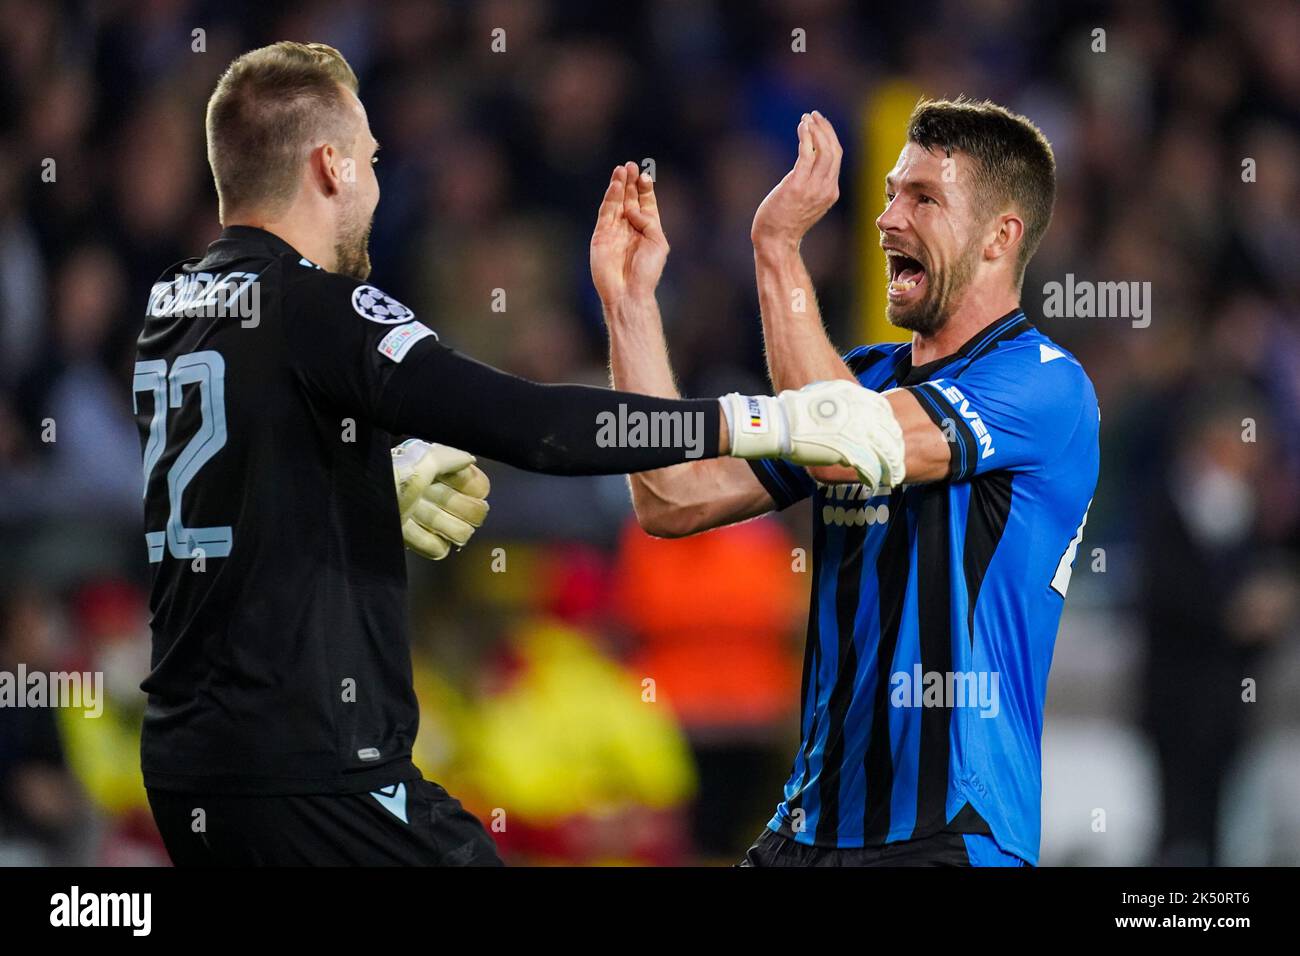 BRUGGES, BELGIUM - OCTOBER 4: Simon Mignolet of Club Brugge KV and Brandon Mechele of Club Brugge KV celebrating their sides win after the Group B - UEFA Champions League match between Club Brugge KV and Atletico Madrid at the Jan Breydelstadion on October 4, 2022 in Brugges, Belgium (Photo by Joris Verwijst/Orange Pictures) Stock Photo